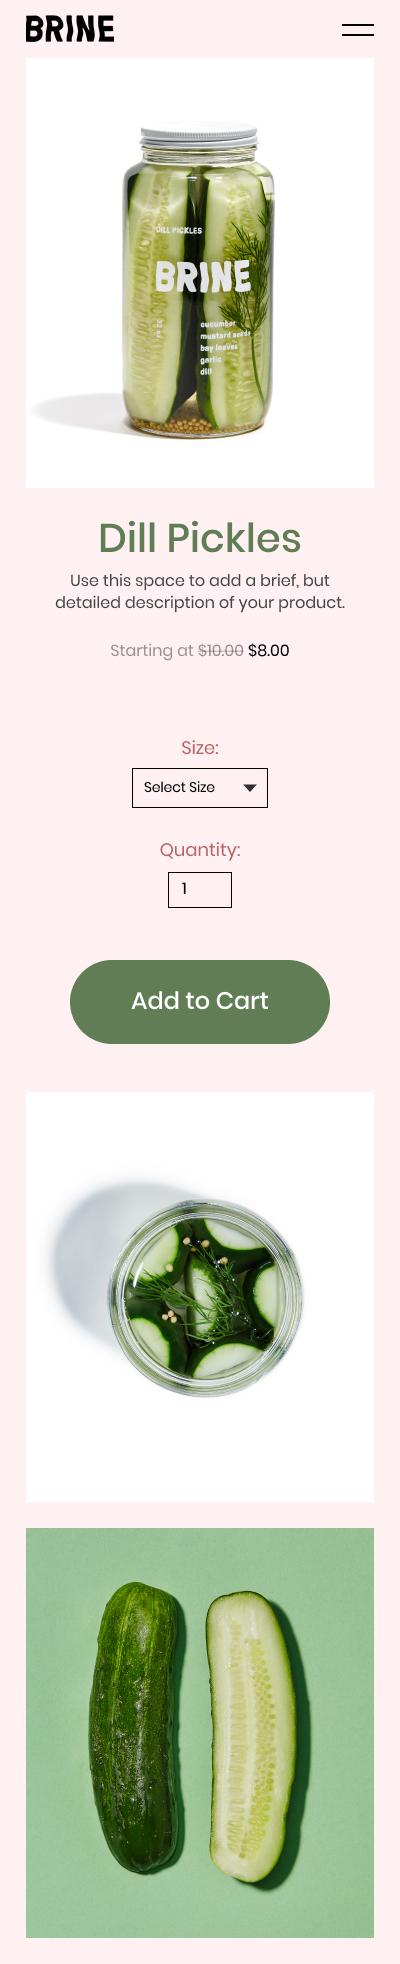 Example of a product detail page on mobile